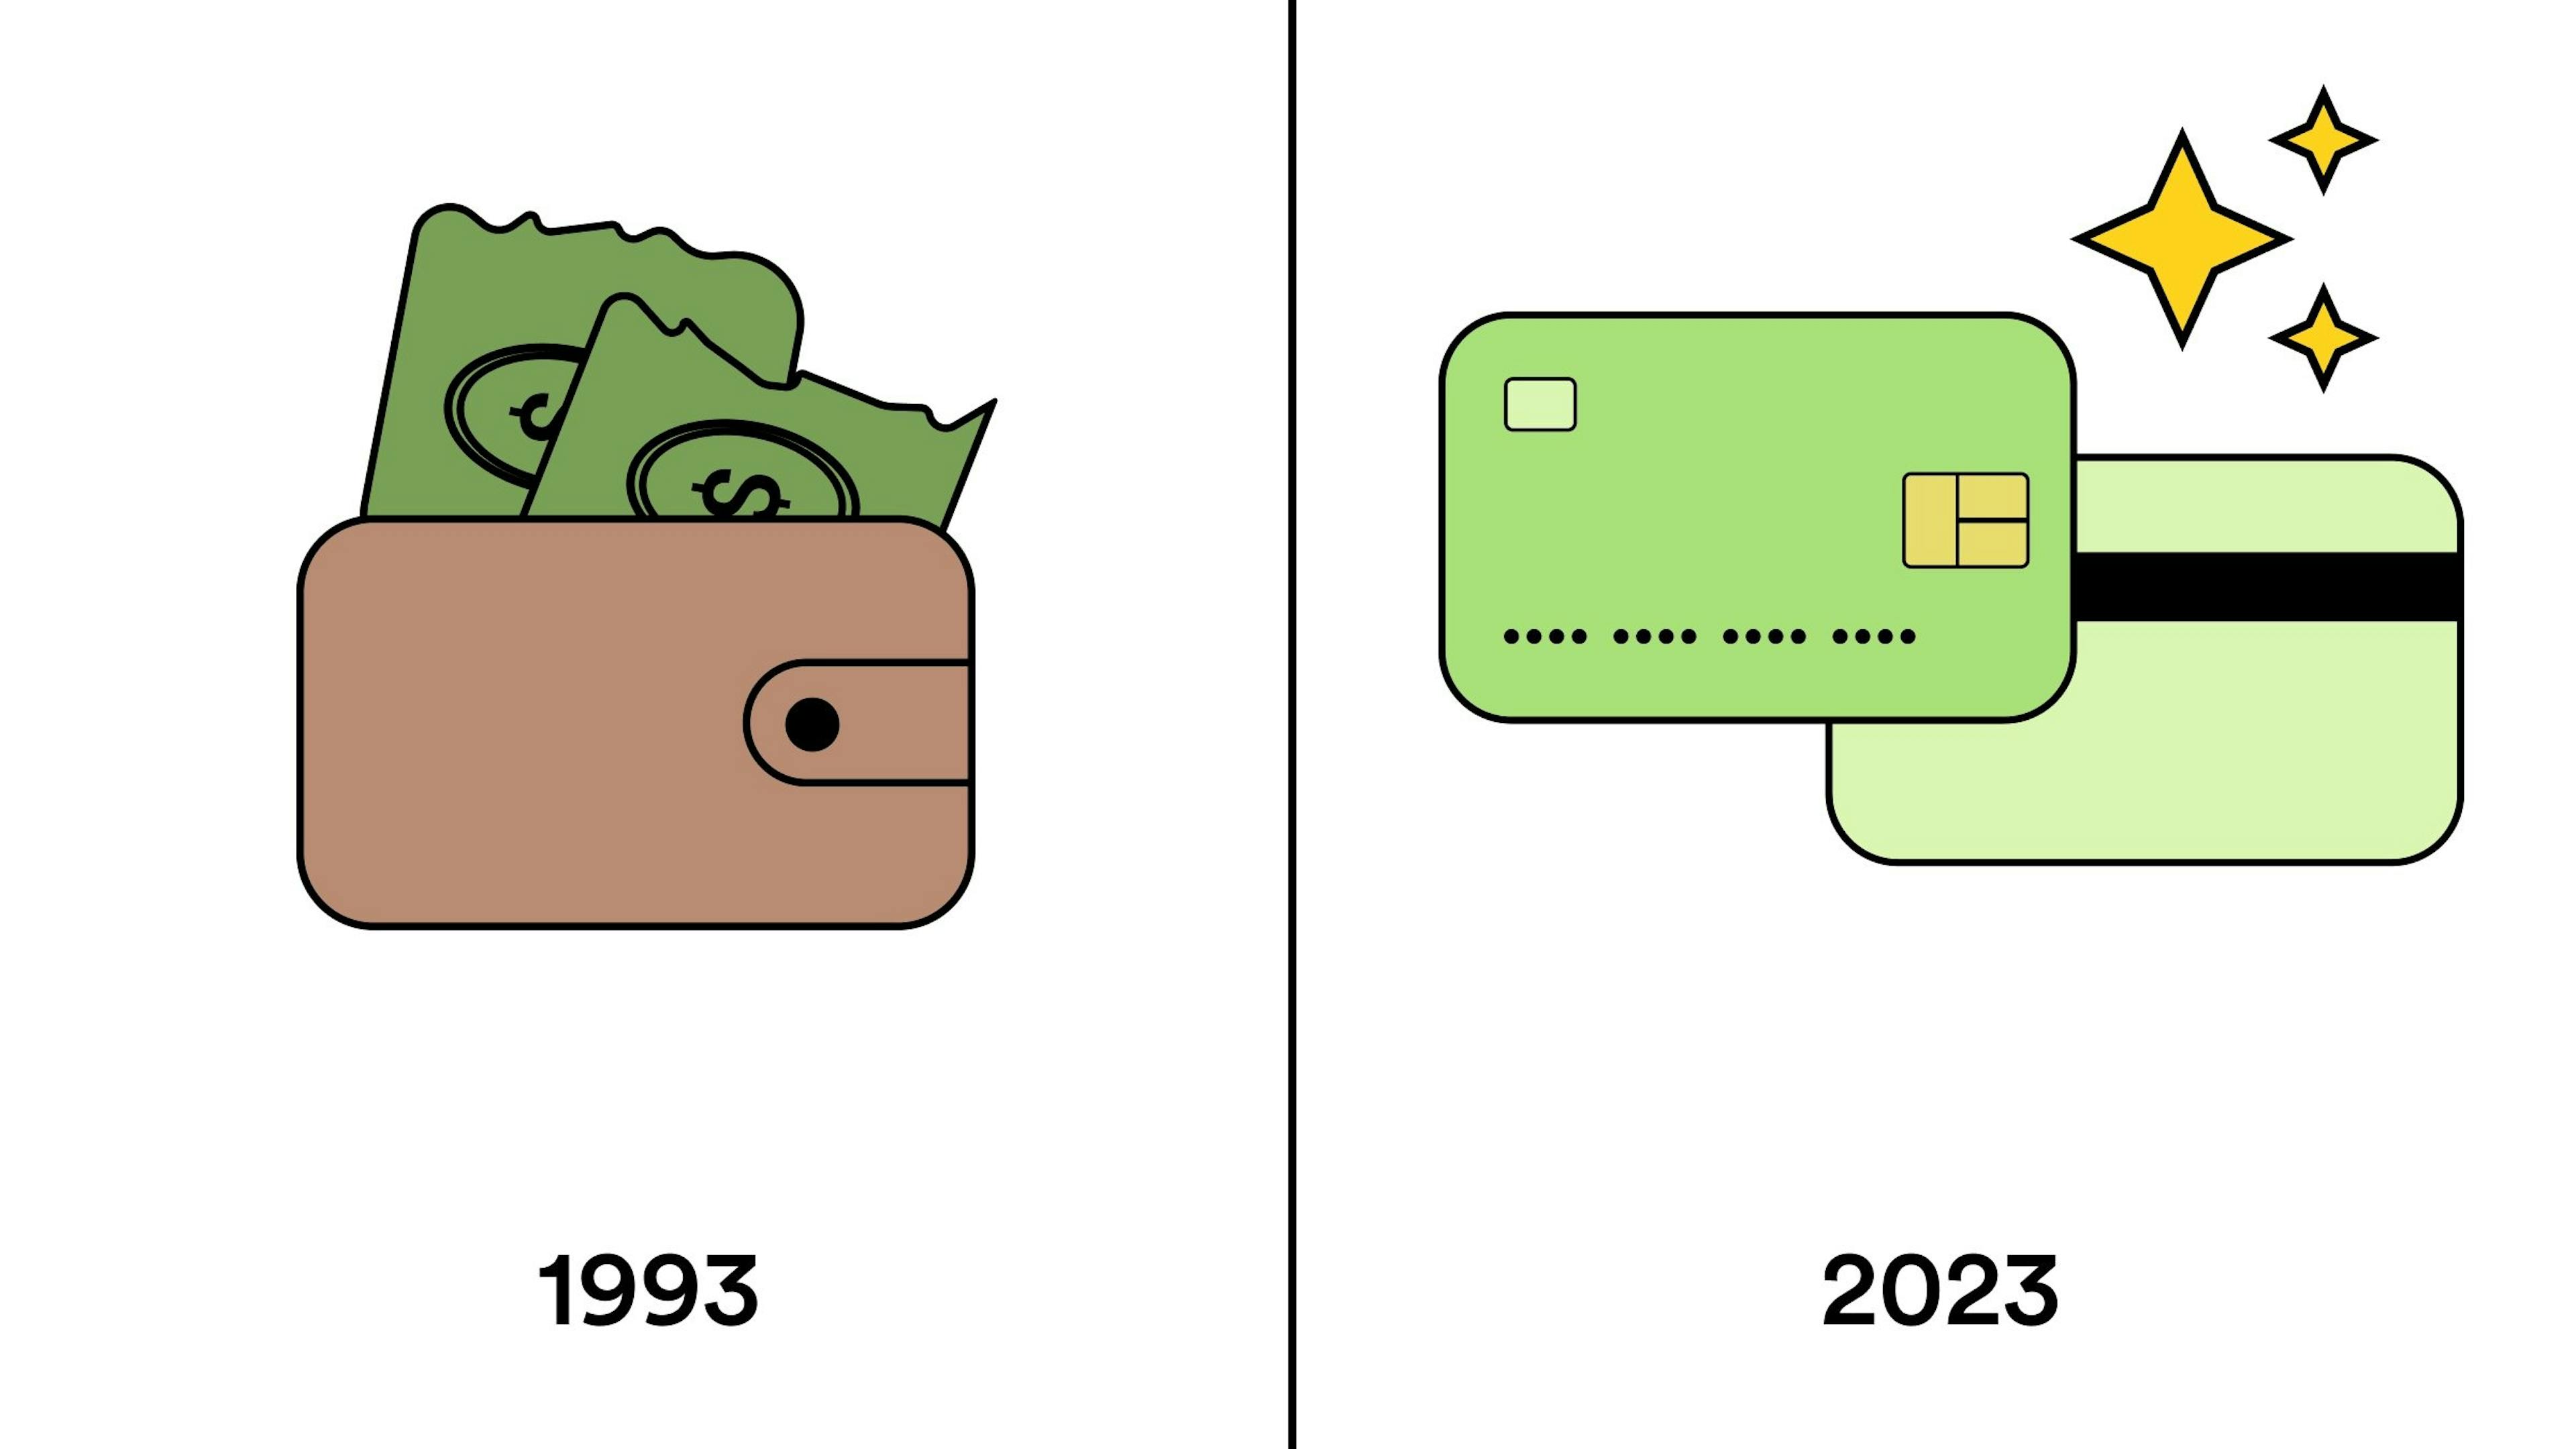 An illustration depicts cash, torn and messy in a wallet with the subtitle 1993. Opposite, a clean, shiny new debit card sparkles, with the subtitle 2023.